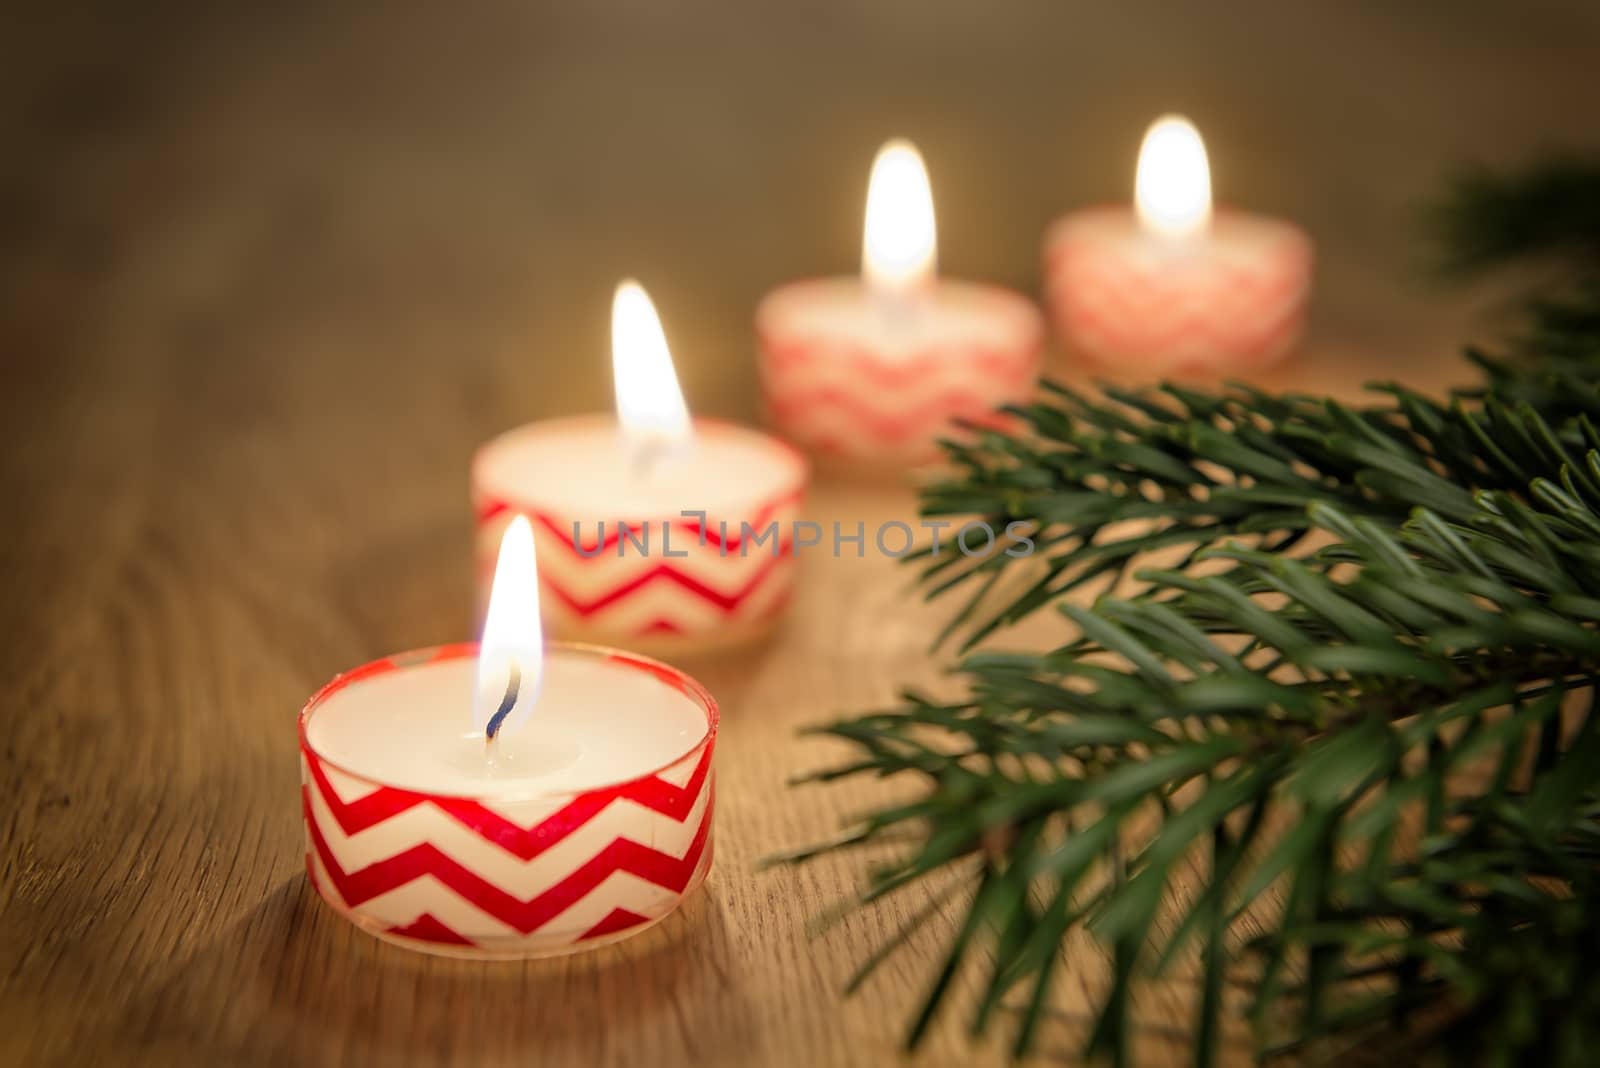 Romantic image of candles on a wooden table